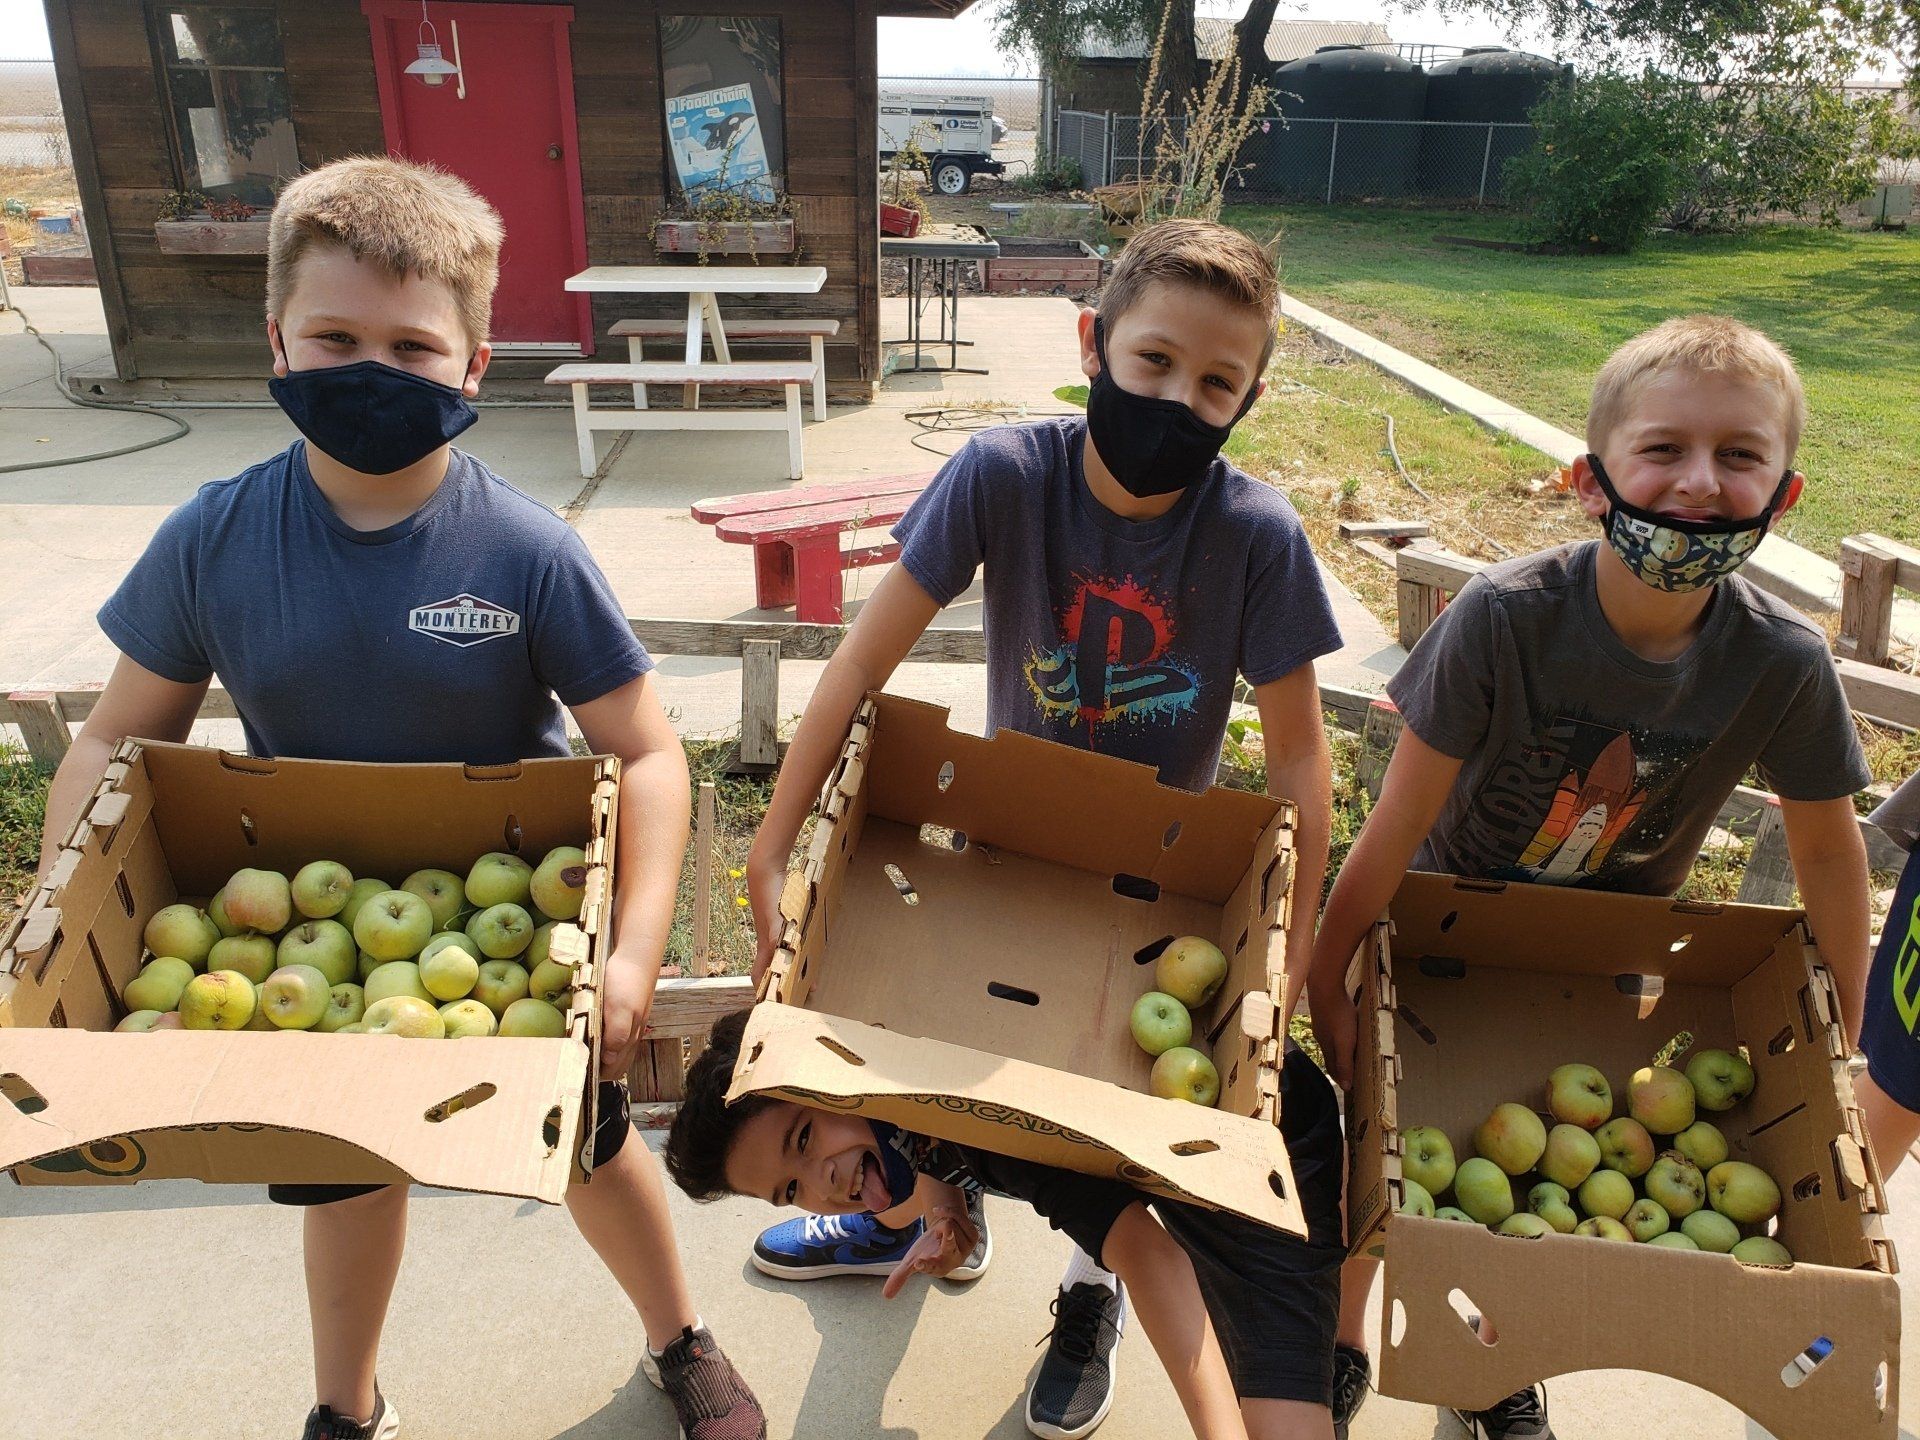 Children hold boxes of apples harvested from school garden